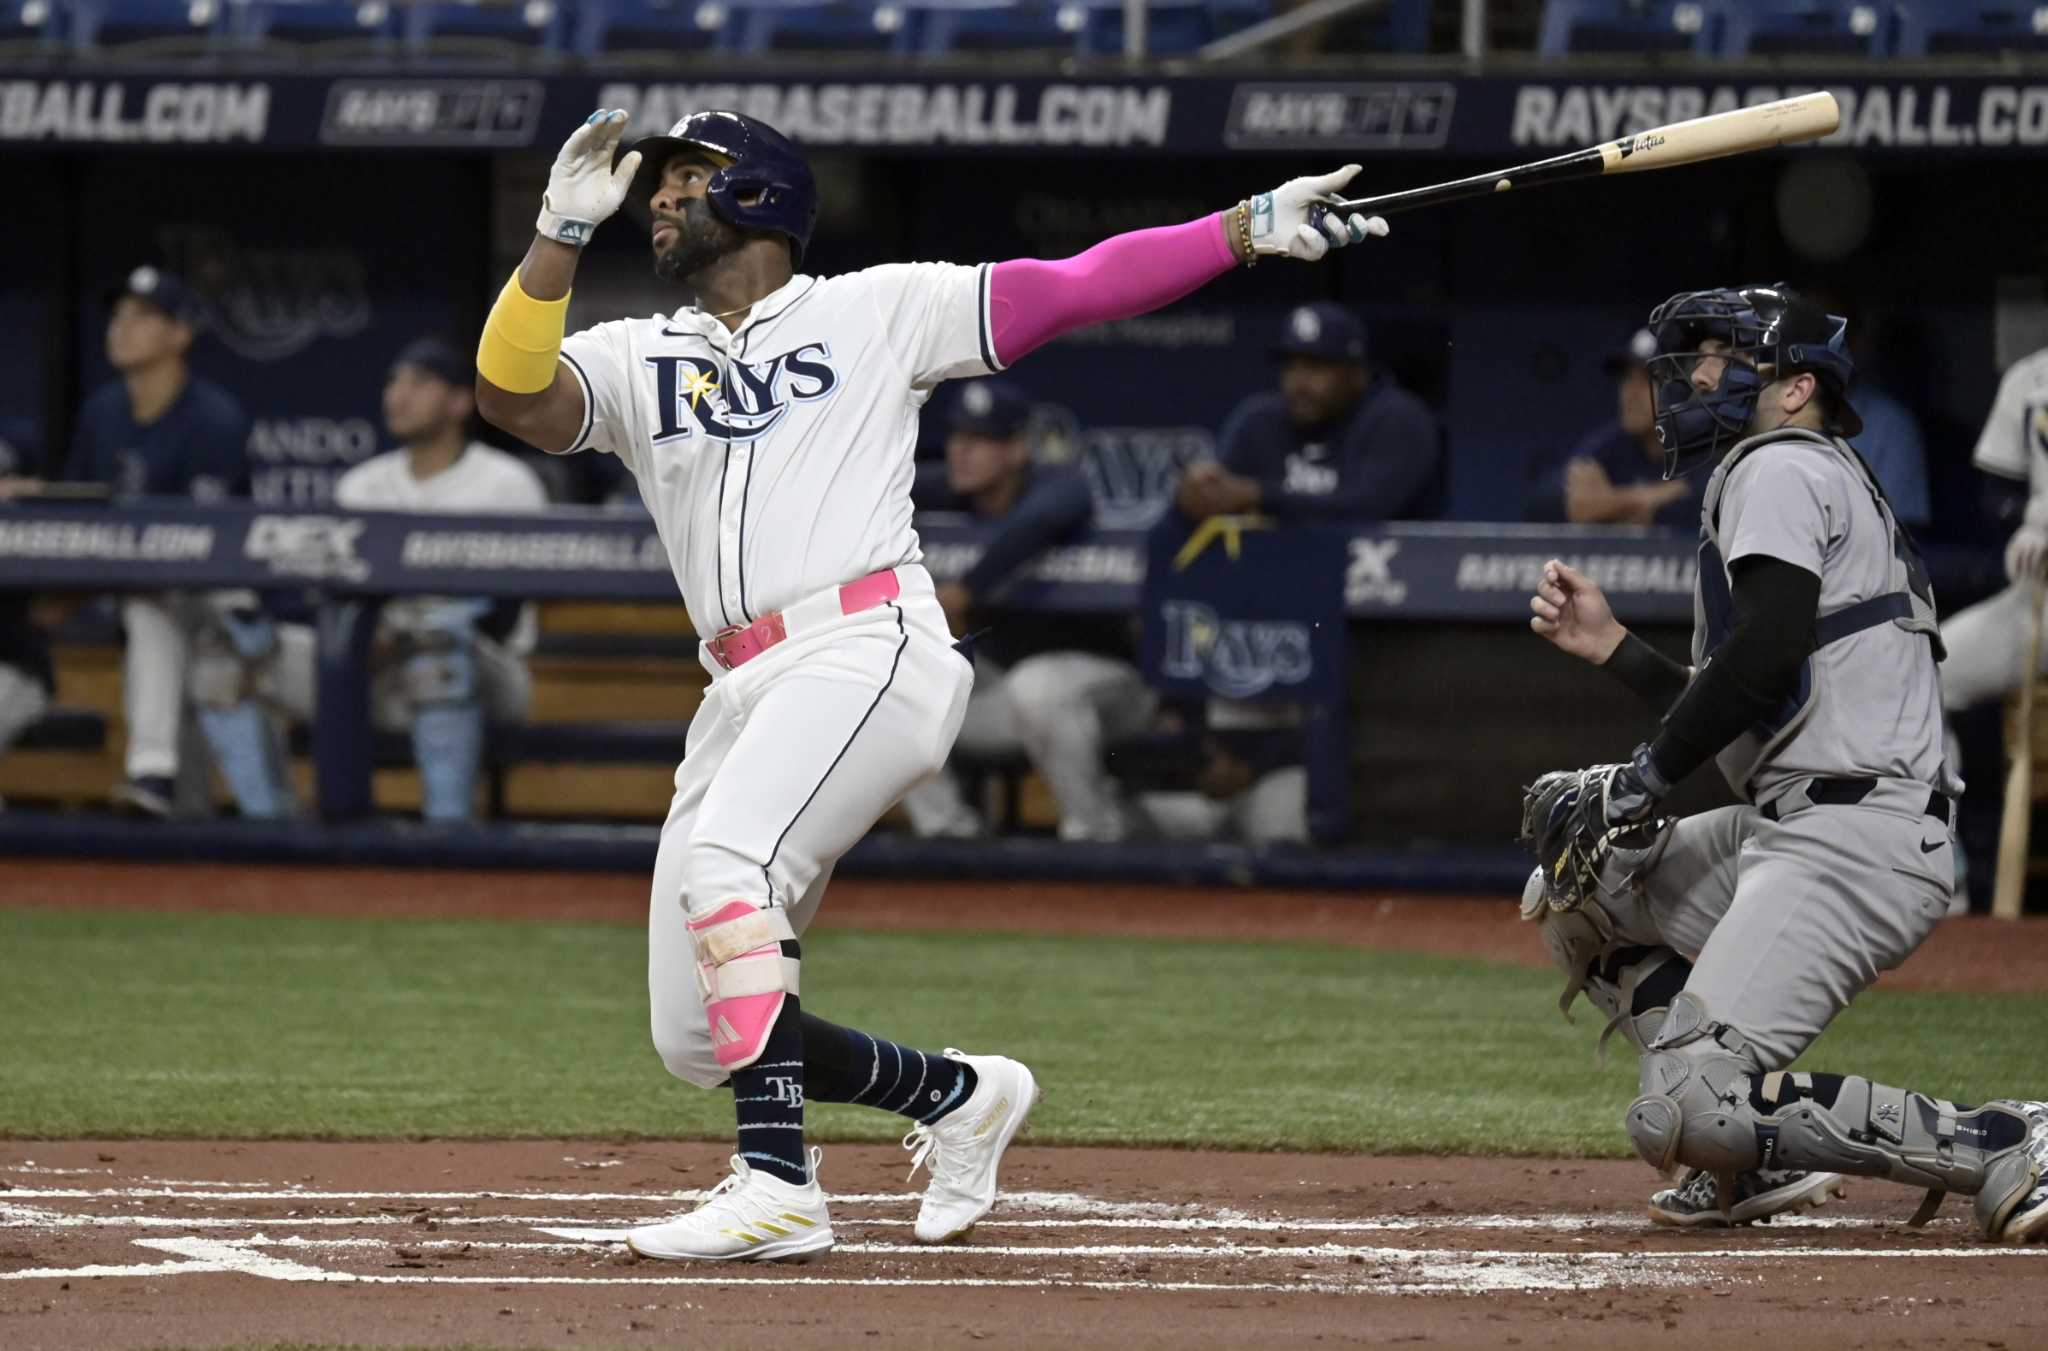 First baseman Yandy Díaz put on the restricted list by the Tampa Bay Rays, Curtis Mead recalled